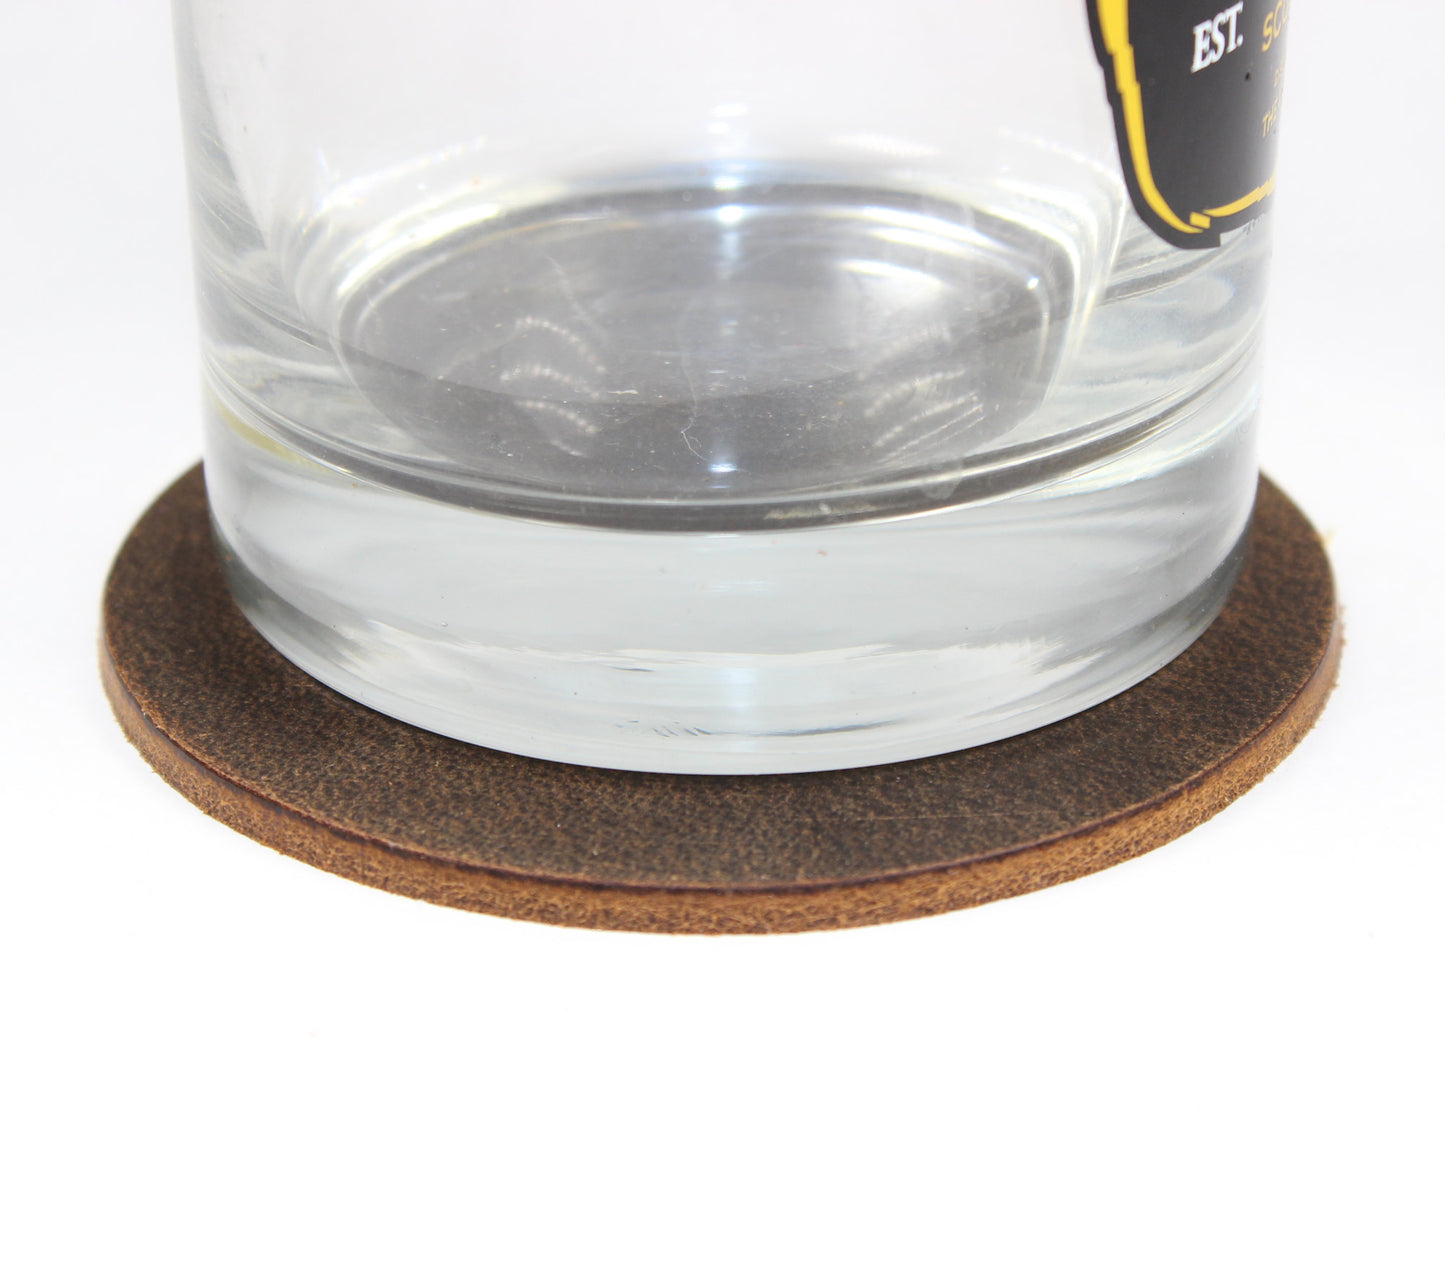 Leather Drink Coasters - 4 Pack